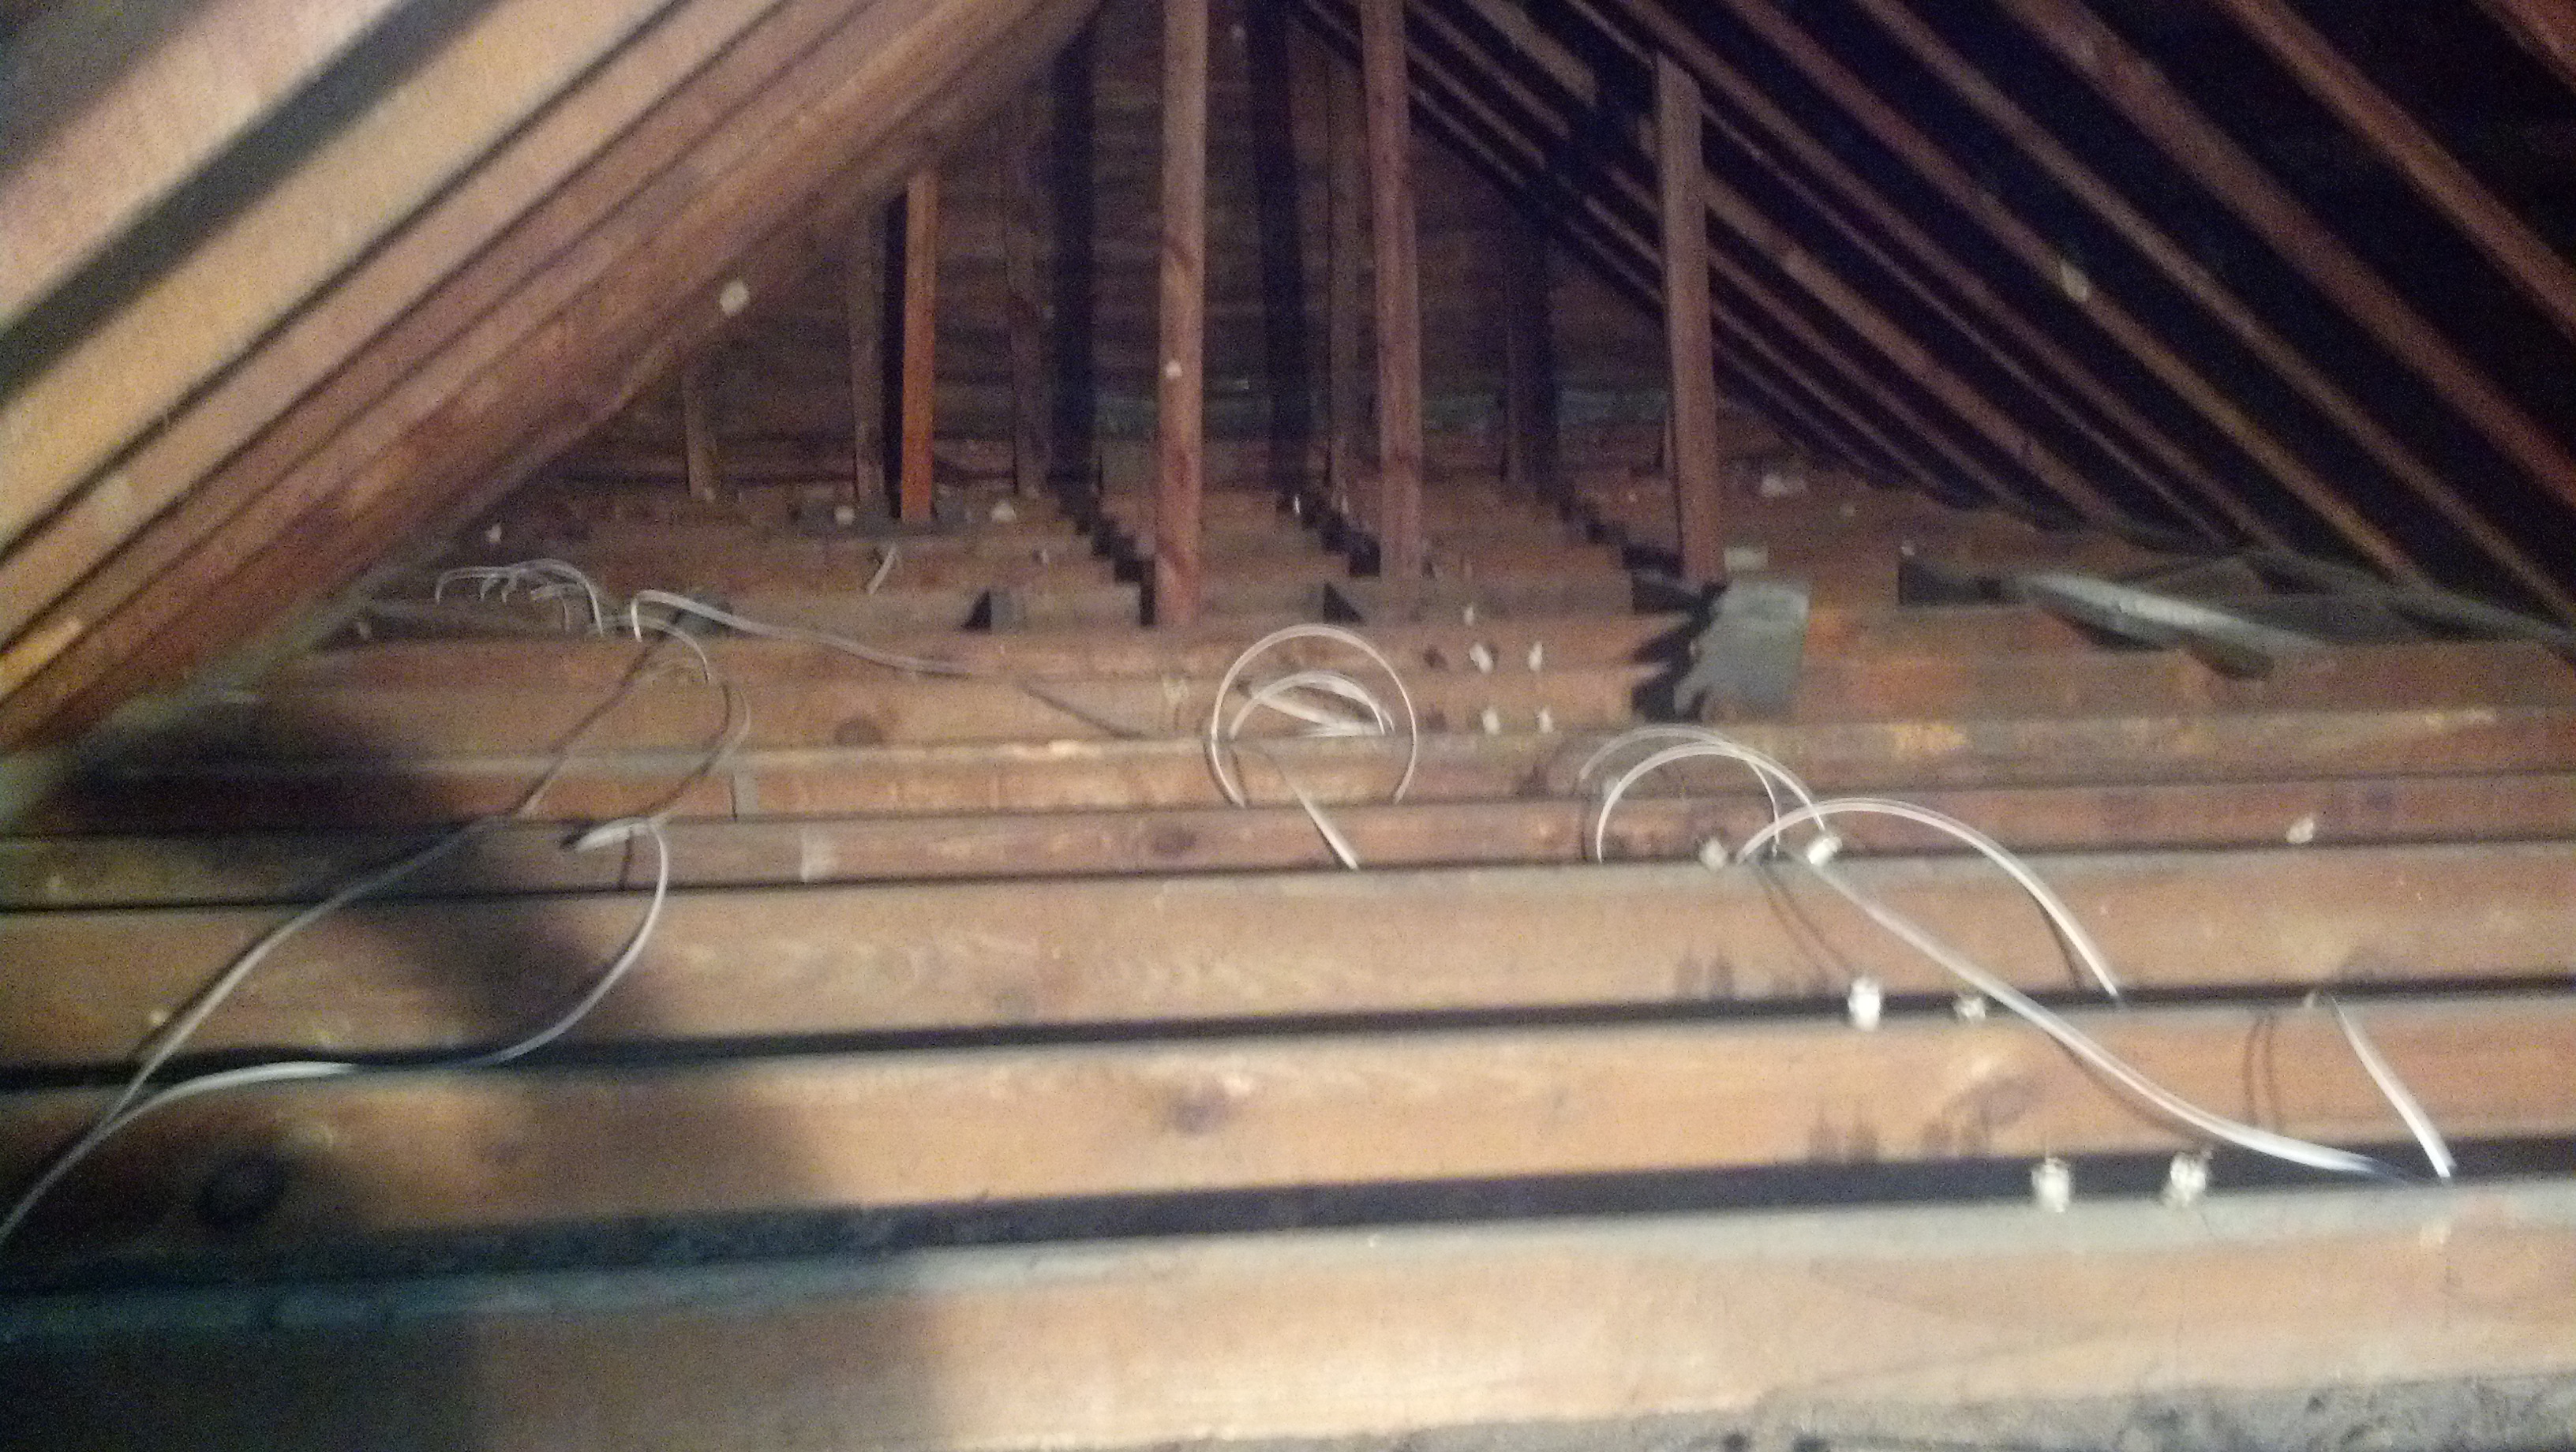 Wiring Up The Attic